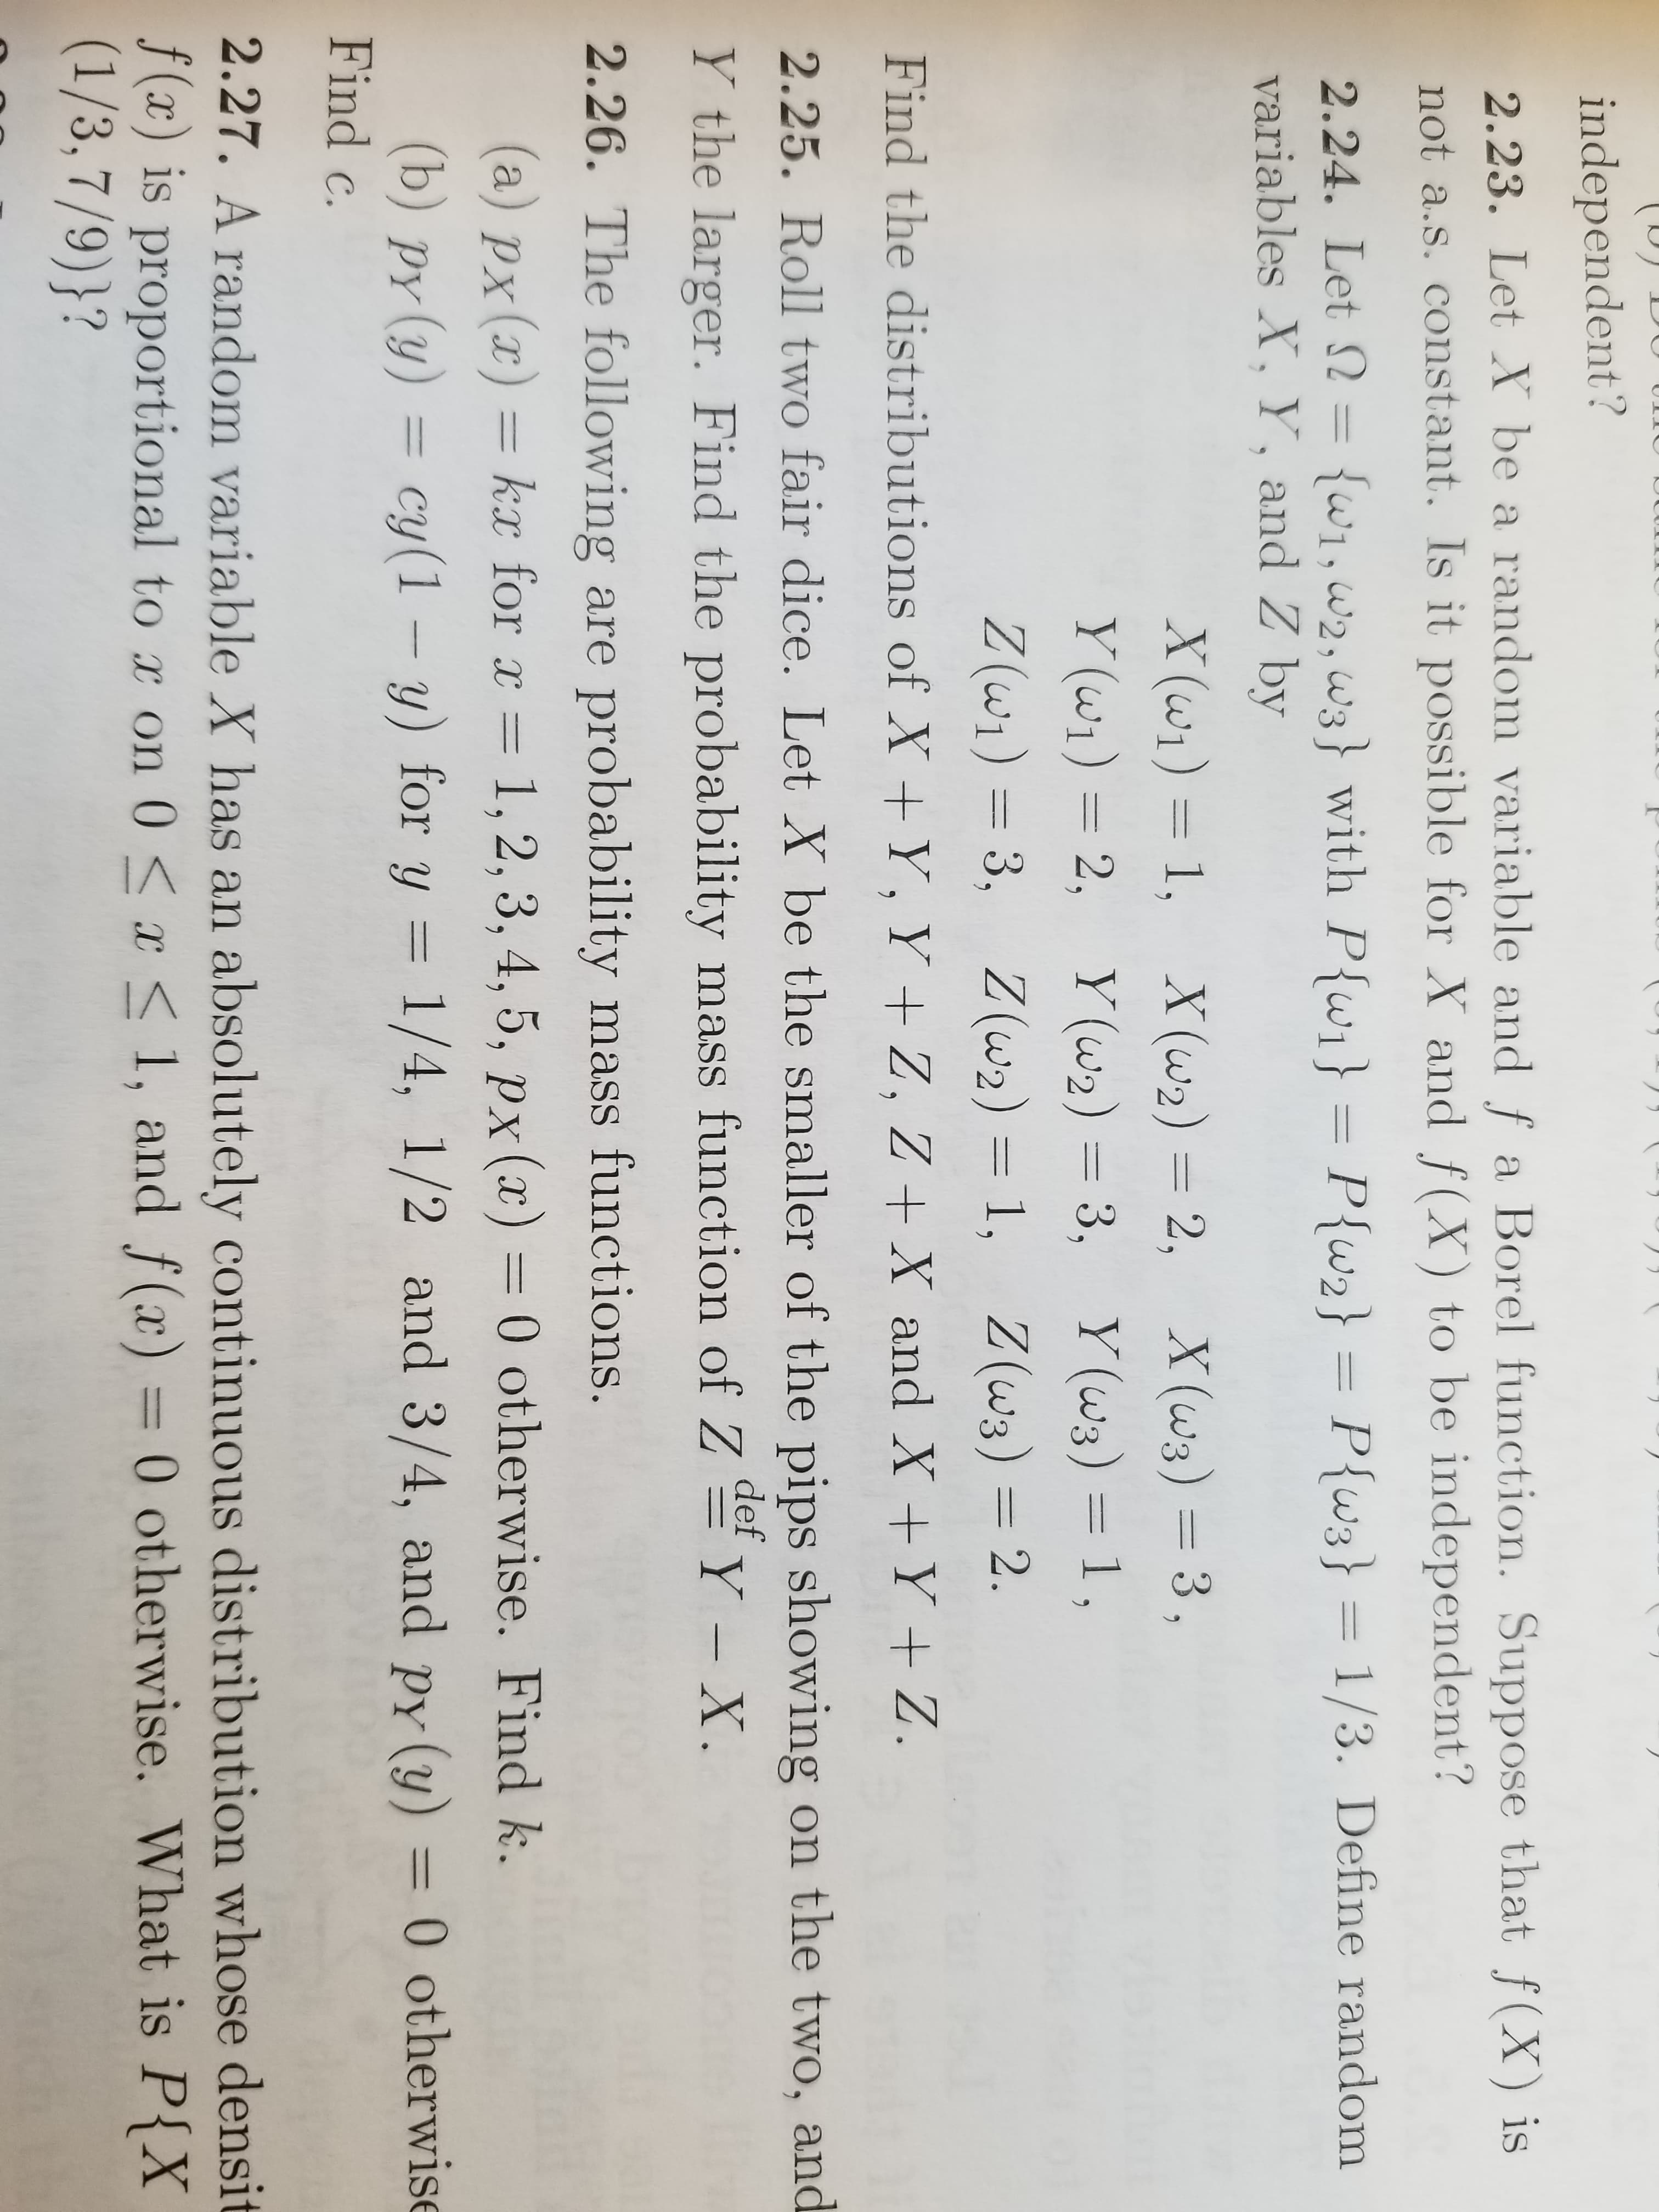 independent?
2.23. Let Y be a random variable and f a Borel function. Suppose that f(X) is
not a.s. constant. Is it possible for X and f(X) to be independent?
2.24. Let 2 1,,ws) with Pfwi
variables X, Y, and Z by
P2Ptws) 1/3. Define random
Find the distributions of X Y, Y + Z, Z X and XY + Z
2.25. Roll two fair dice. Let X be the smaller of the pips showing on the two, and
Y the larger. Find the probability mass functio of Y -X.
2.26. The following are probability mass functions.
def
(a) PX (x) = kx for x = 1, 2, 3, 4, 5, px(x) = 0 otherwise. Find k.
(b) py (y) cy(1 - y) for y 1/4, 1/2 and 3/4, and py () 0 otherwise
Find c.
2.27. A random variable X has an absolutely continuous distribution whose densit
f(x) is proportional to x on 0 < x < 1, and f(x) = 0 otherwise. What is P(X
